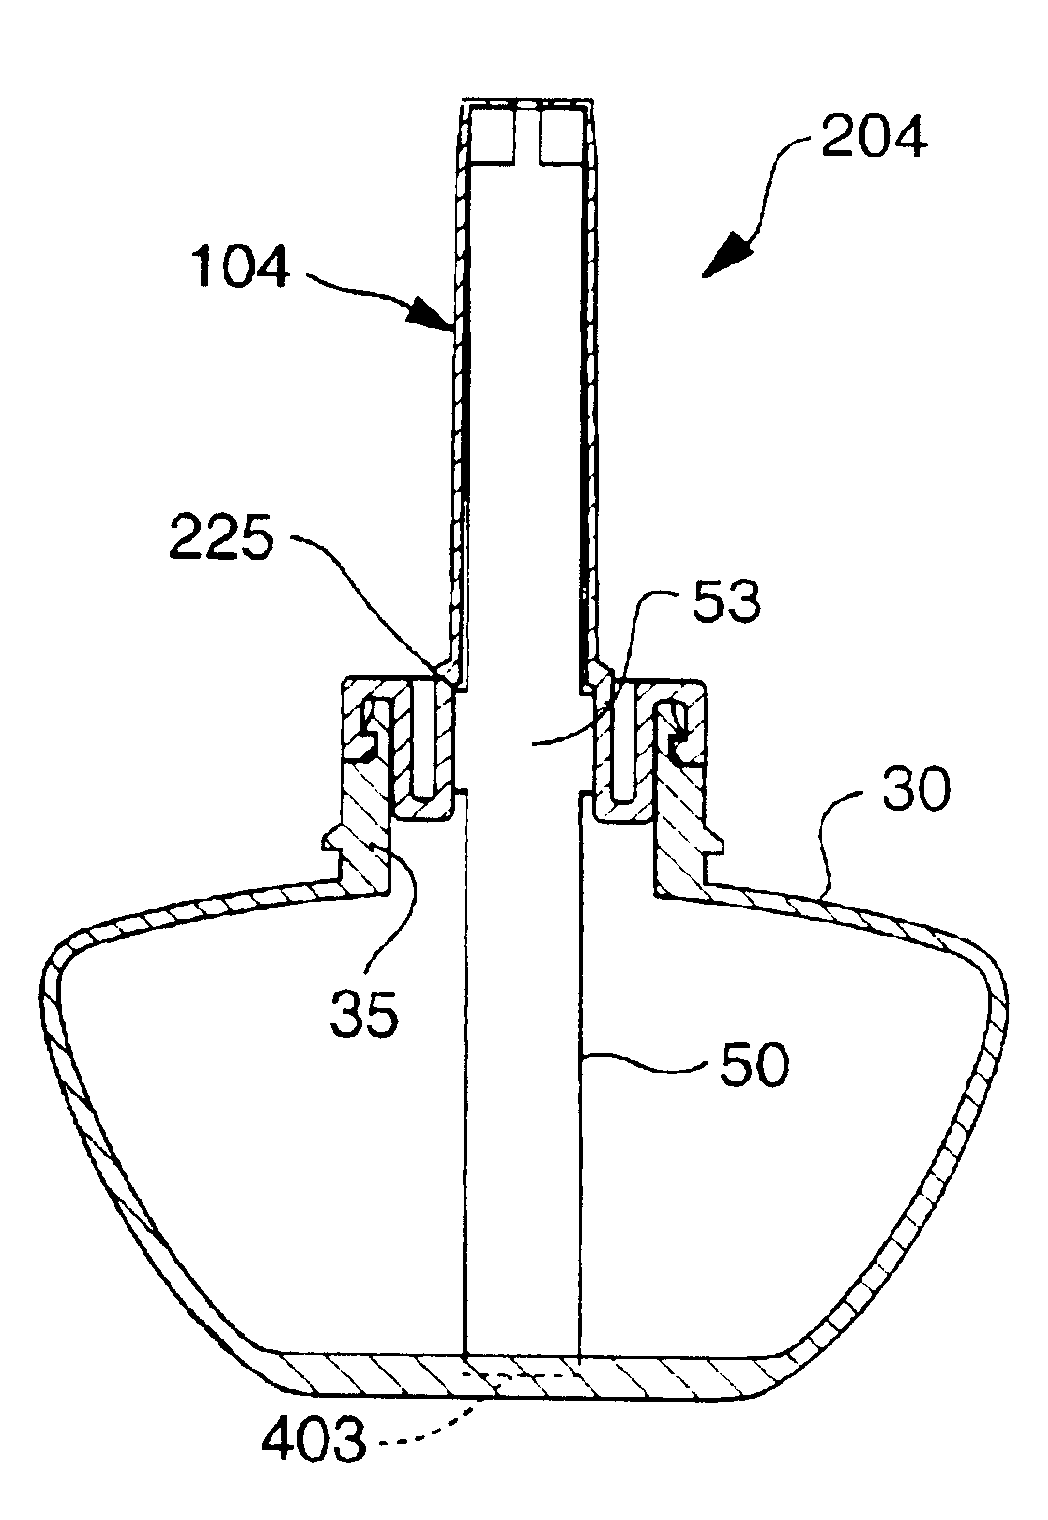 Wick-based liquid emanation system with child-resistant overcap